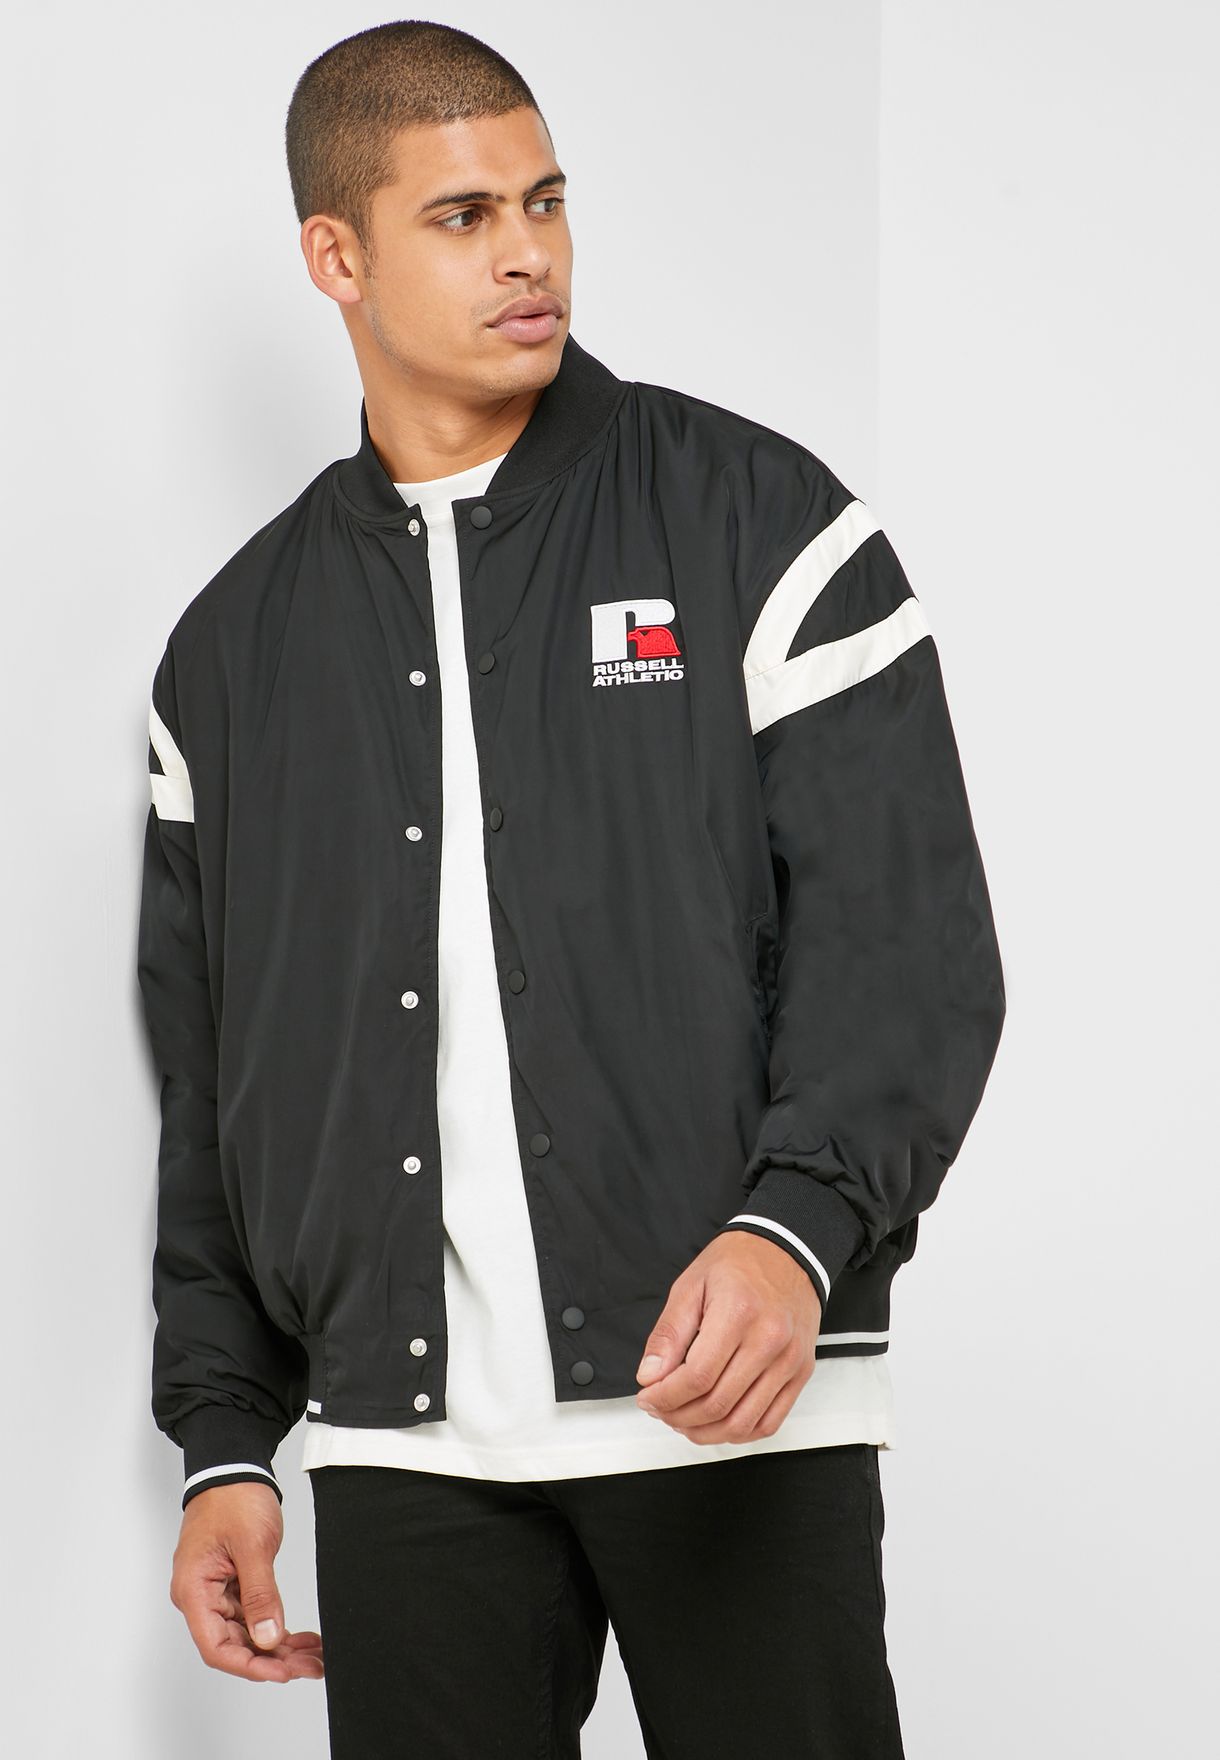 russell athletic jacket